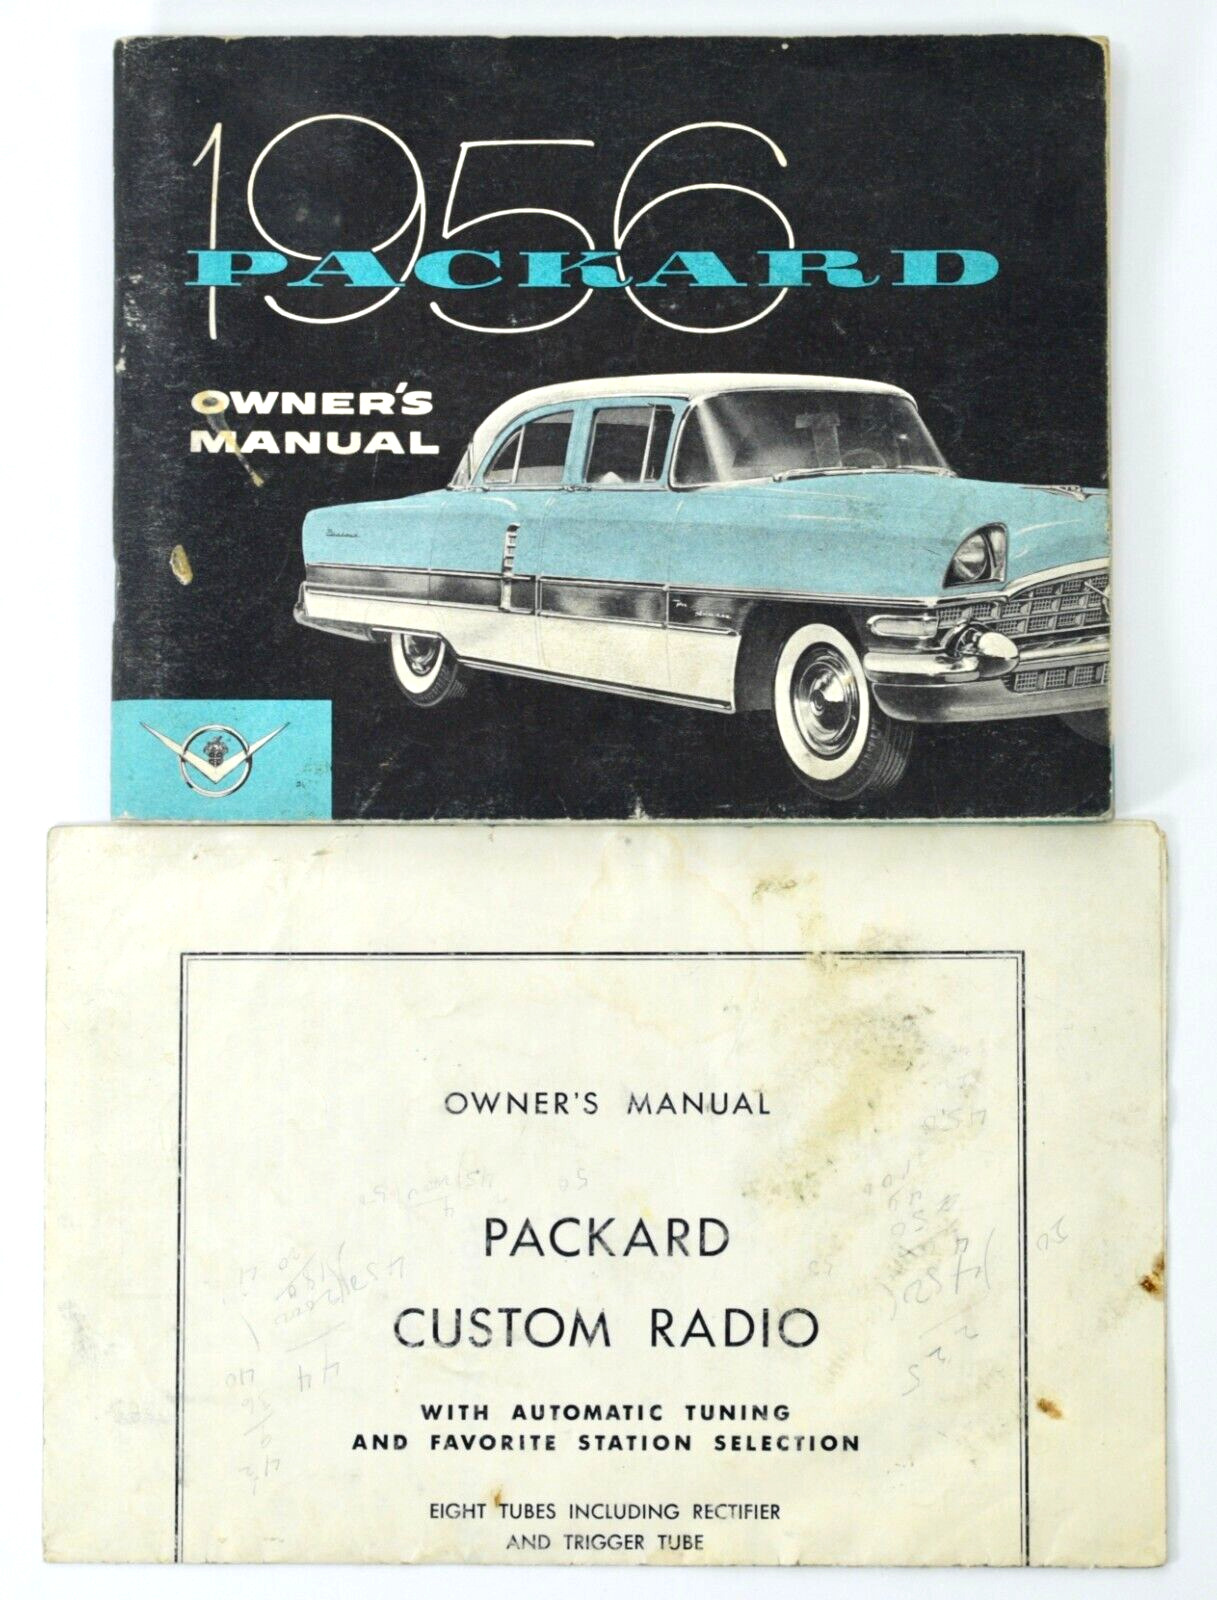 1956 PACKARD Owner's Manual Studabaker-Packard Corp with Custom Radio Manual